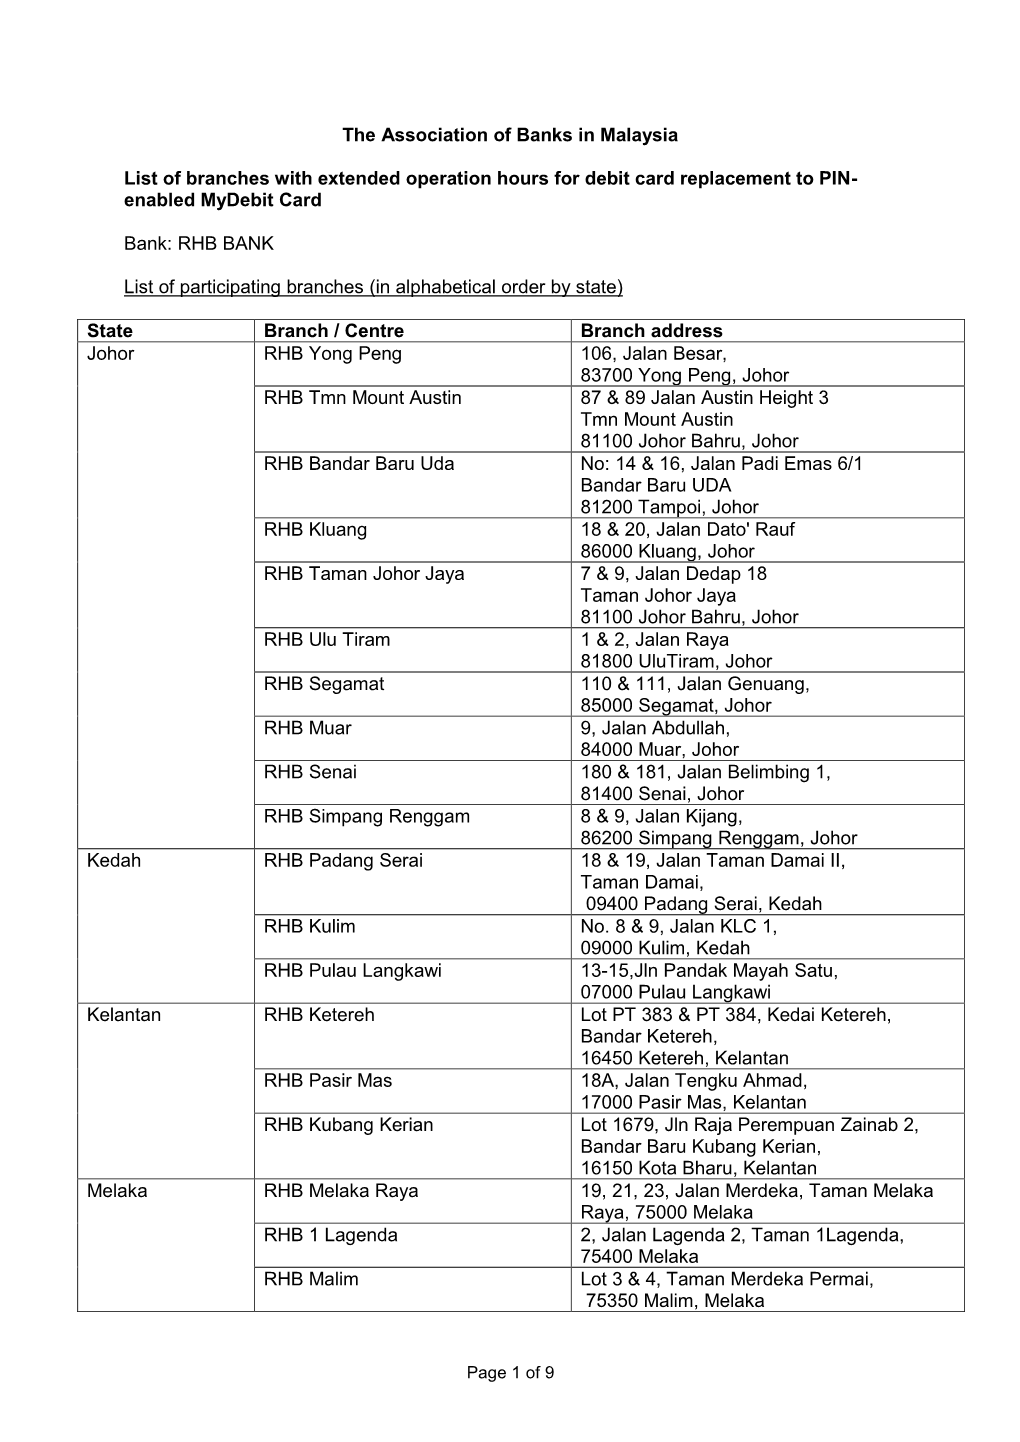 The Association of Banks in Malaysia List of Branches with Extended